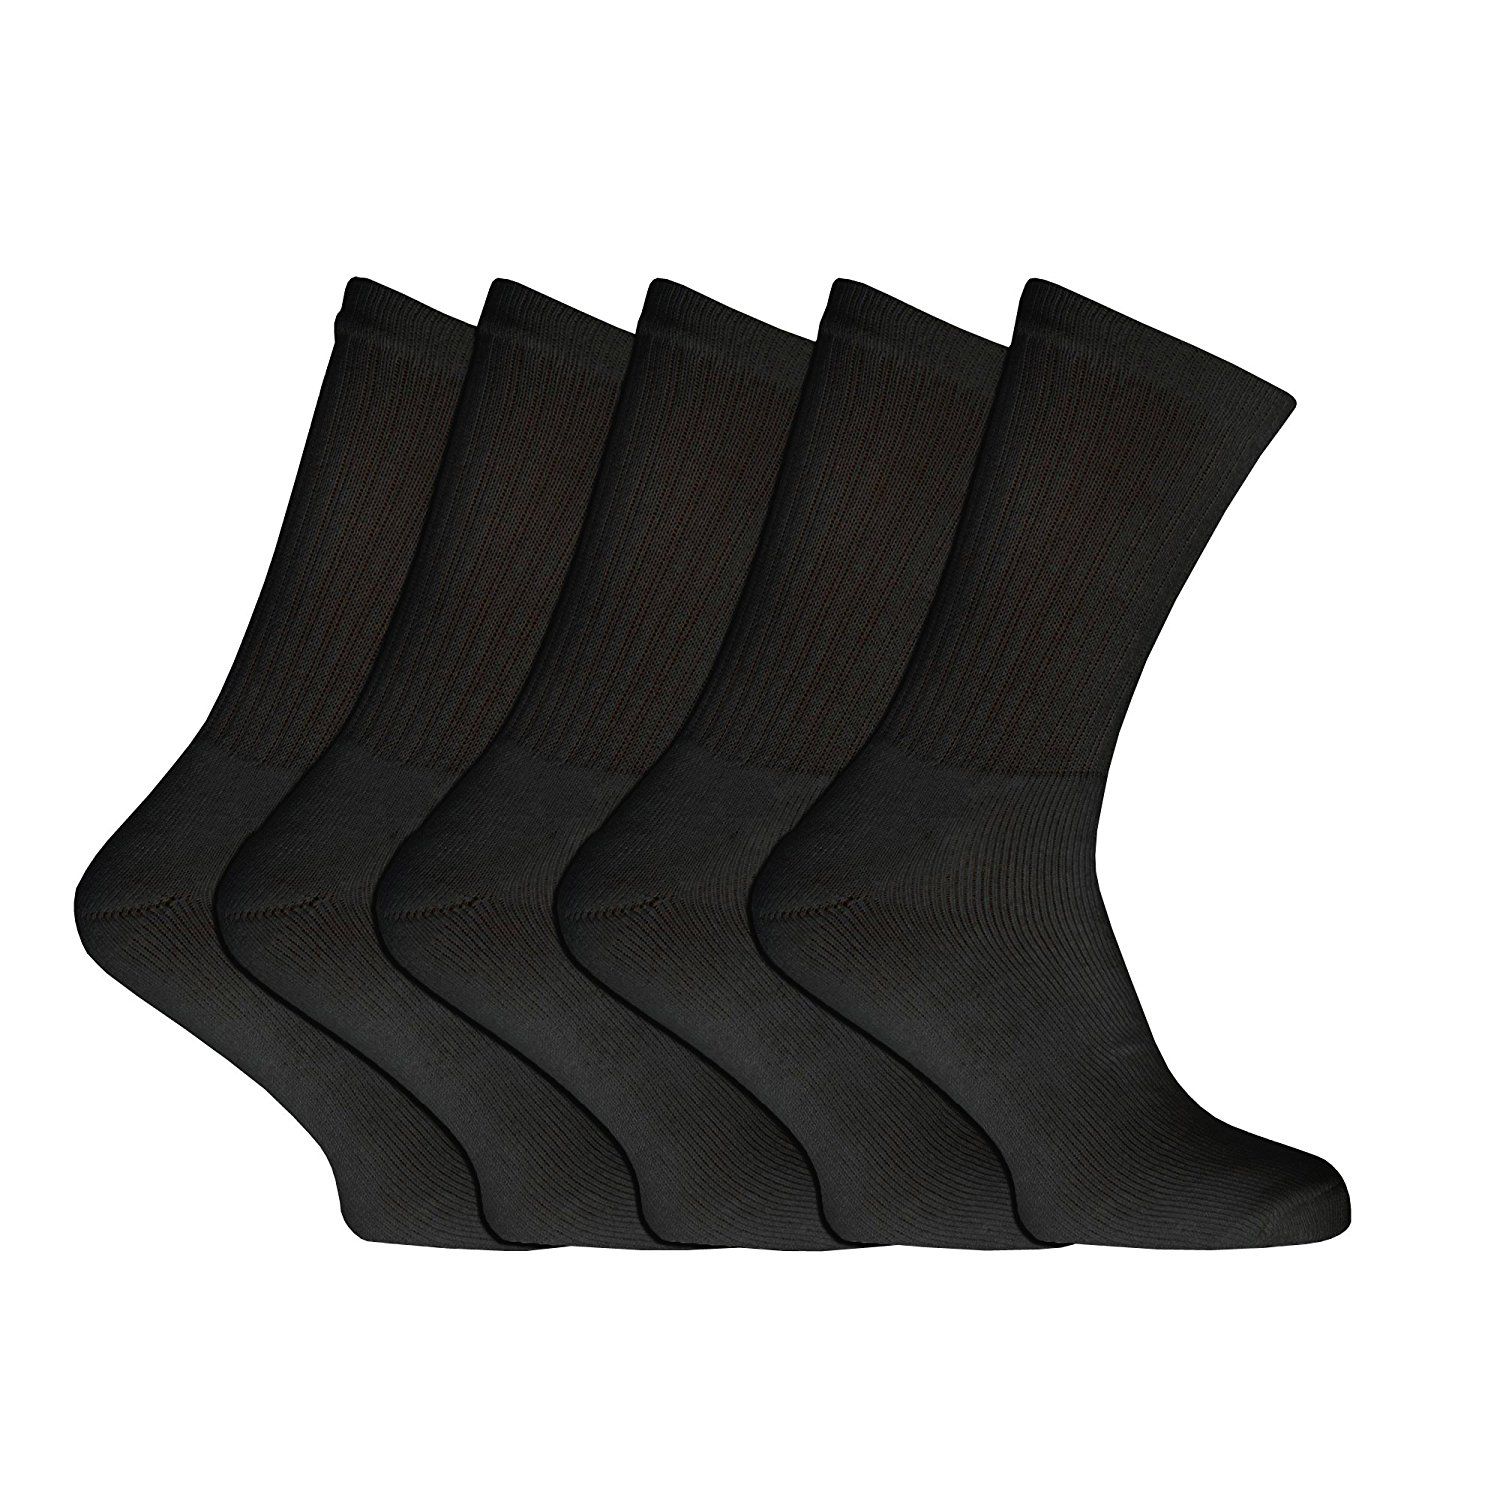 socks 5 pair men: Buy Online at Low Price in India - Snapdeal